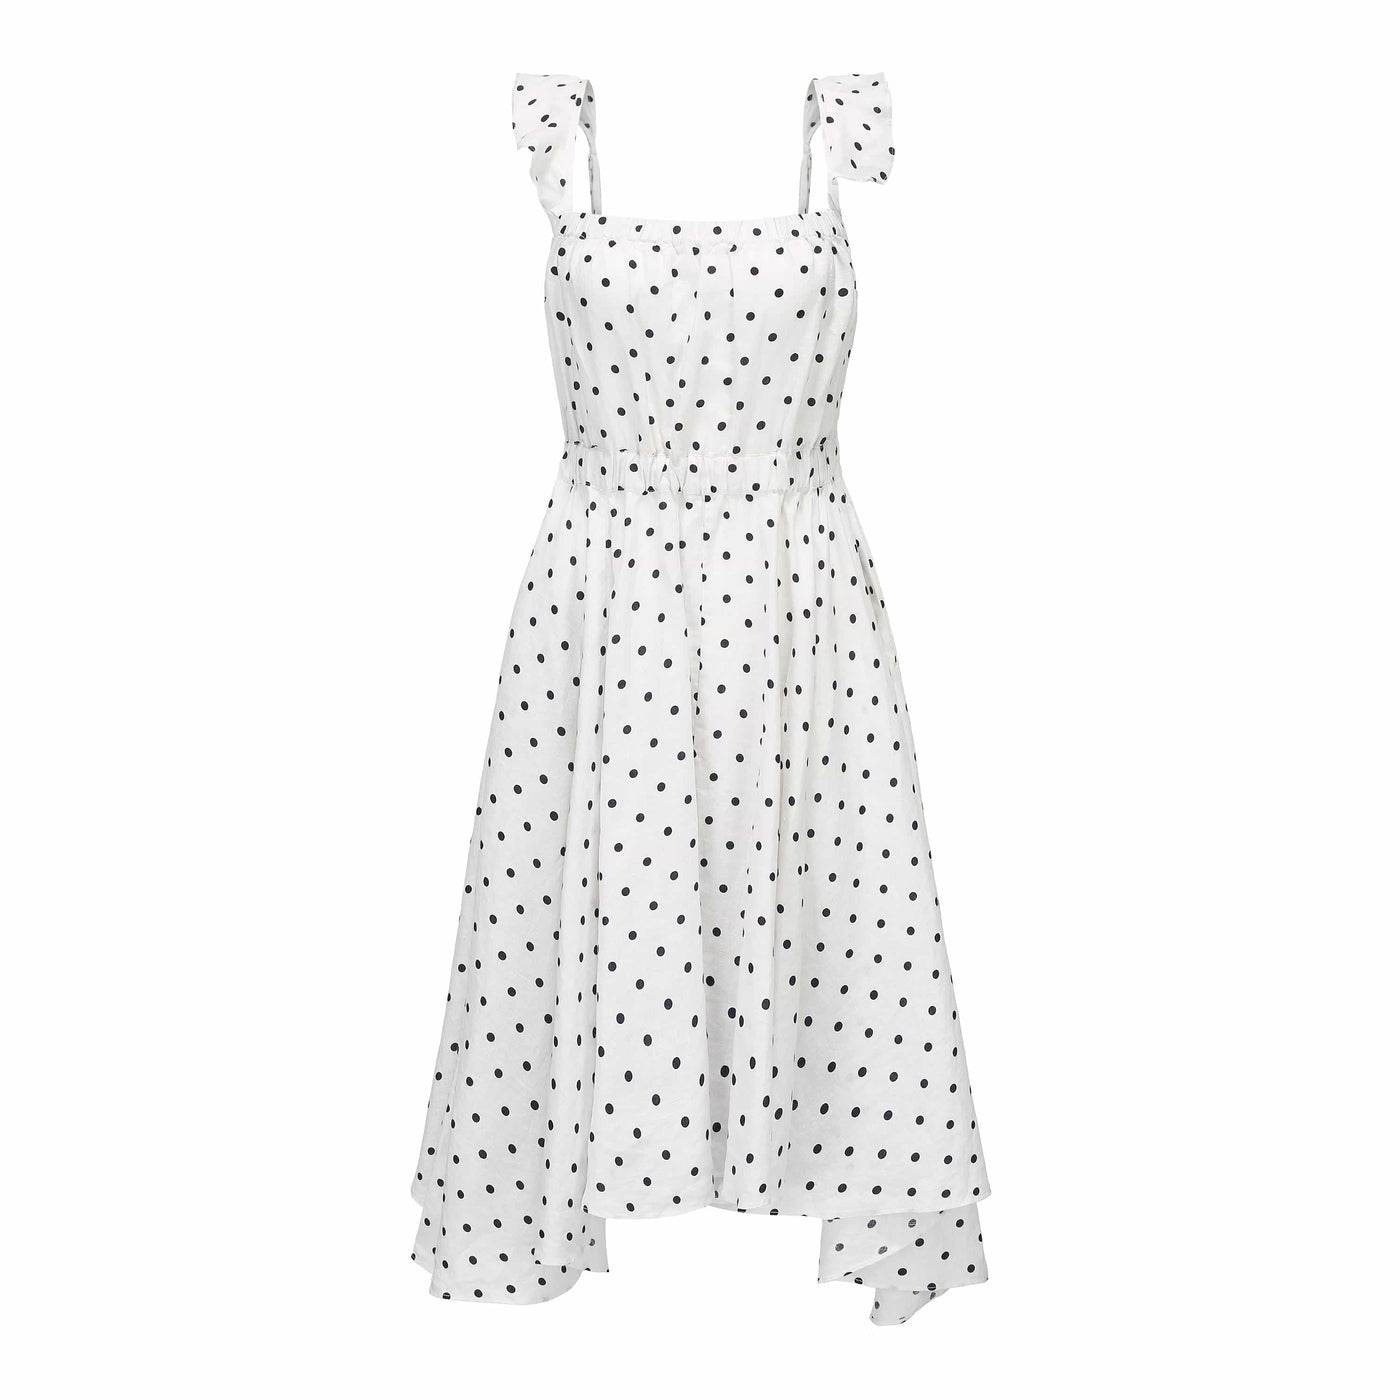 Lilly Pilly Collection 100% organic linen Mia Dress in Polka Dot as 3D model front view